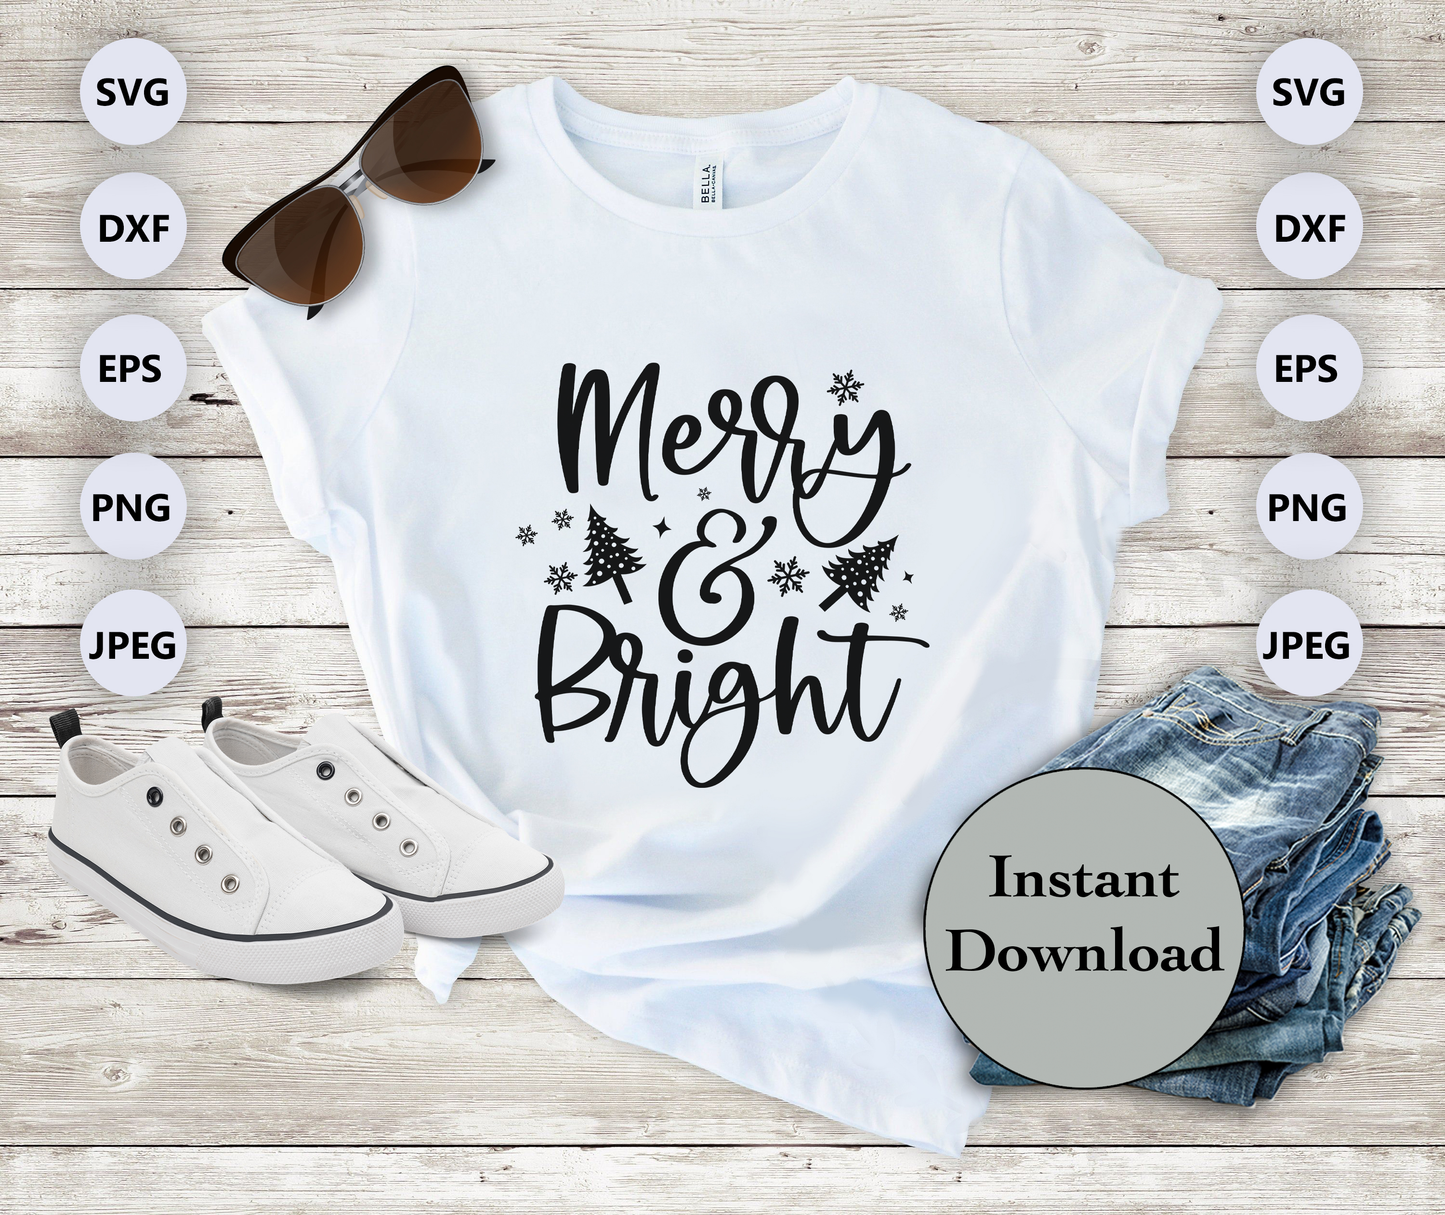 Merry & Bright SVG, PNG, JPG, EPS, DXF Design, Instant Download • Digital Cutting Files